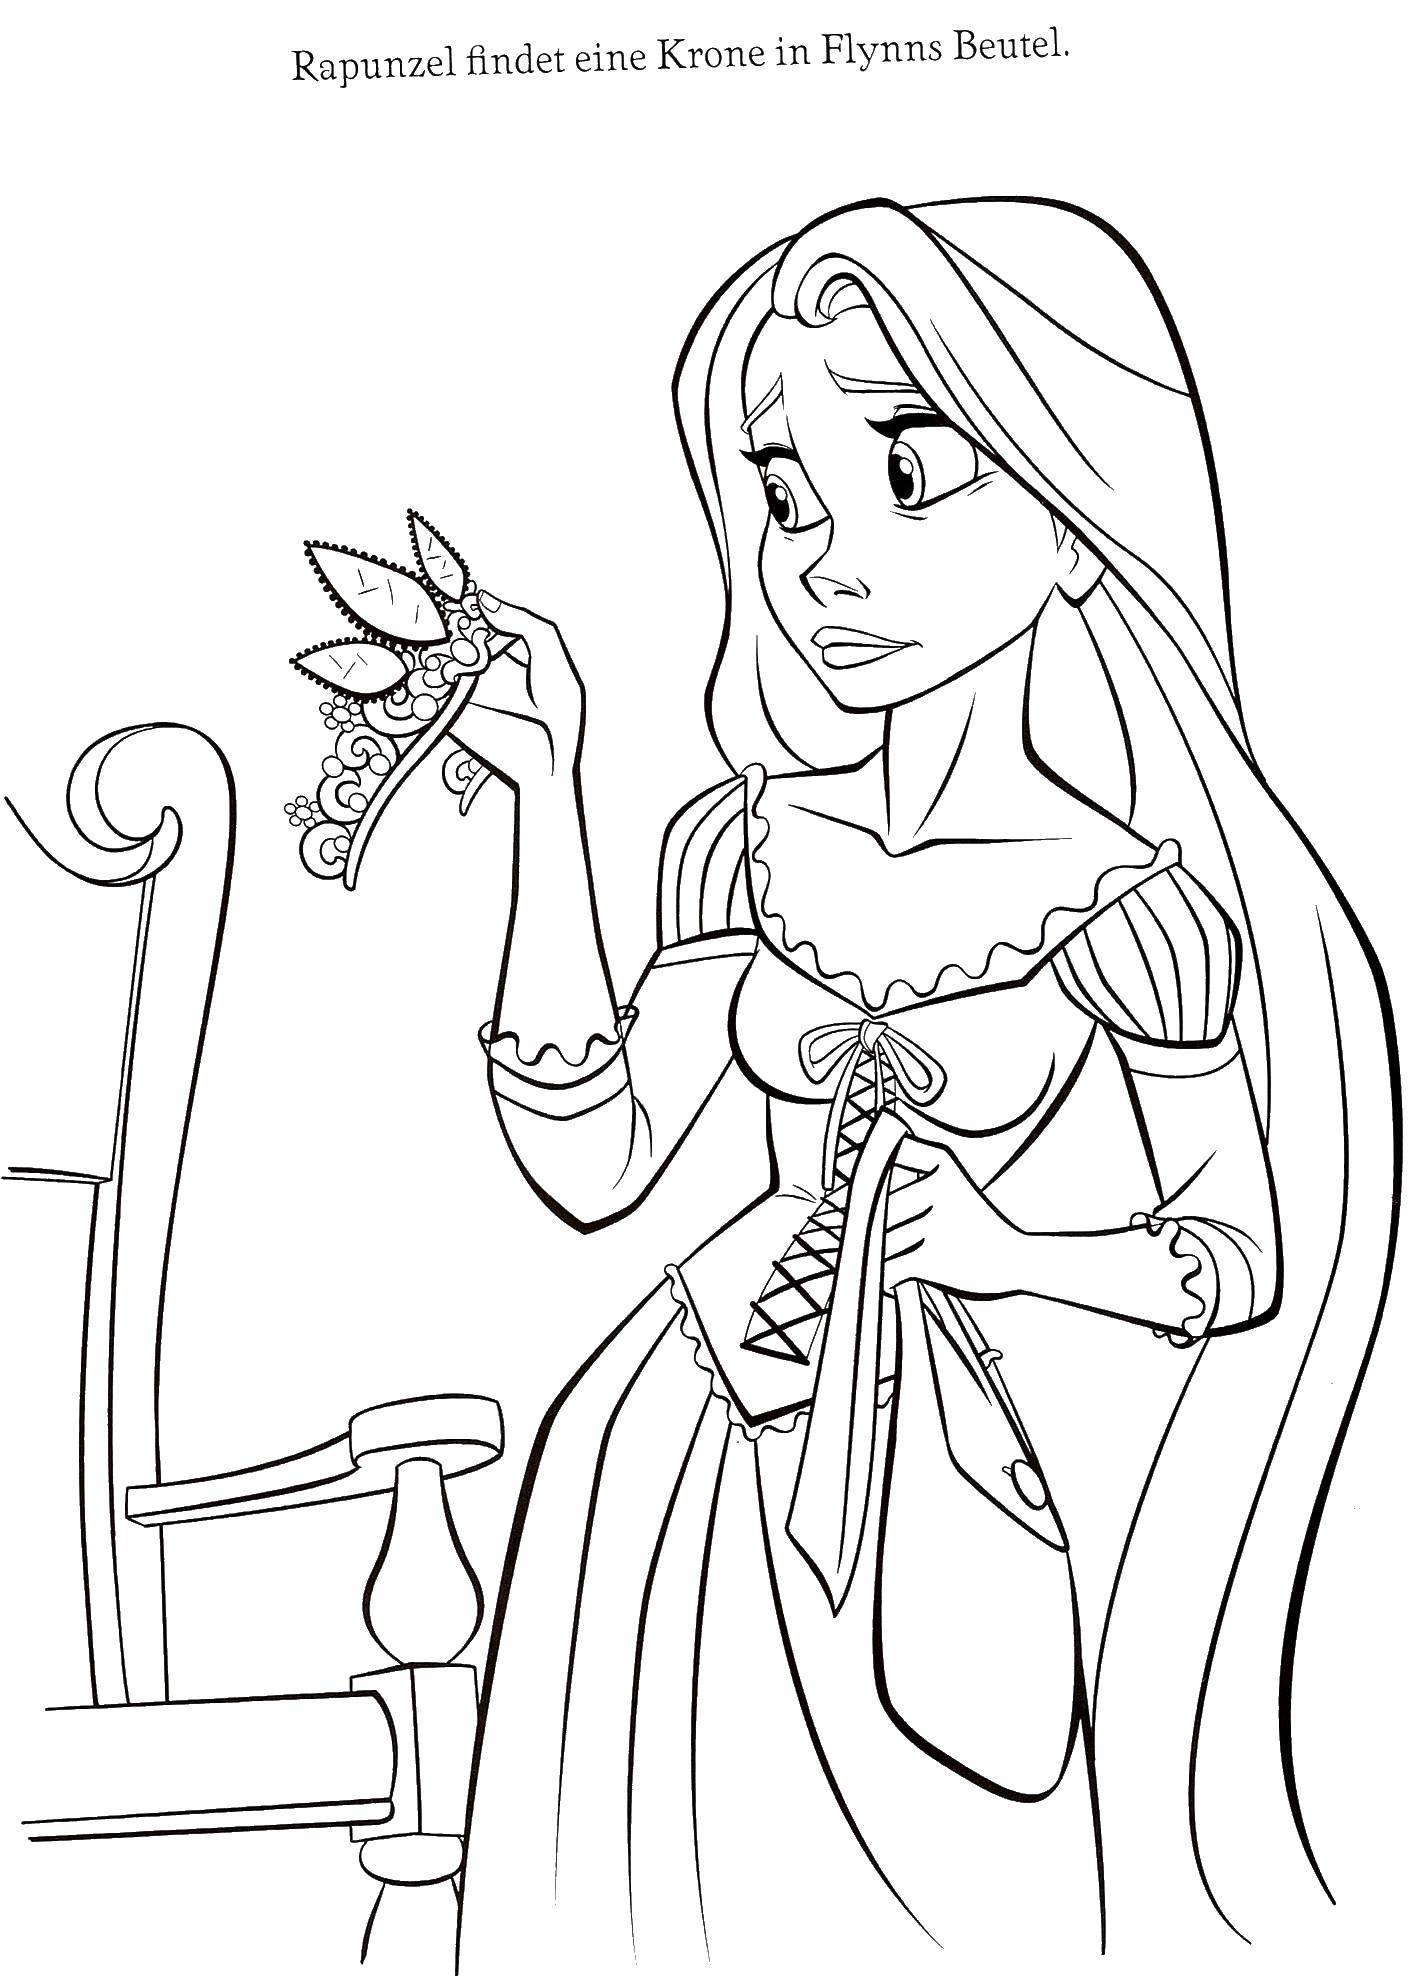 Coloring Rapunzel and crown. Category Princess. Tags:  Rapunzel, hair, crown.